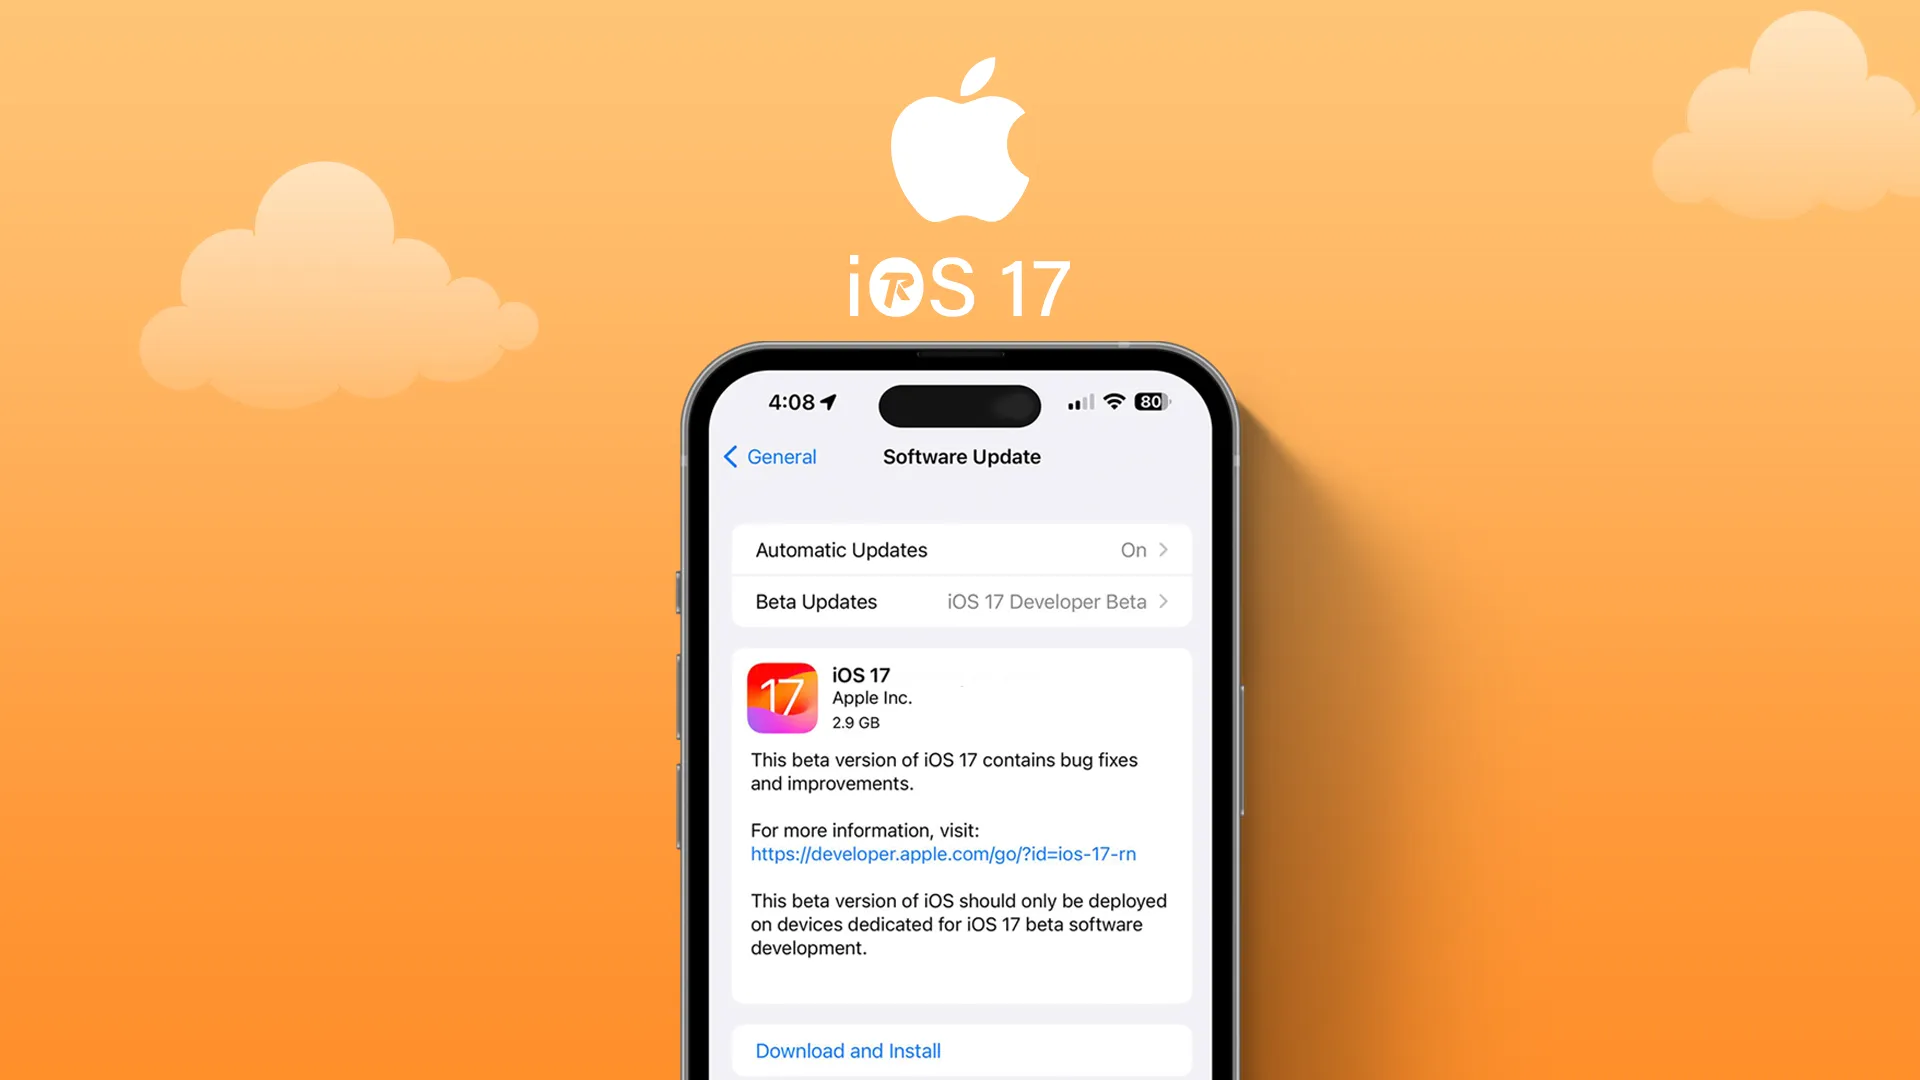 iOS 17 Update and Features